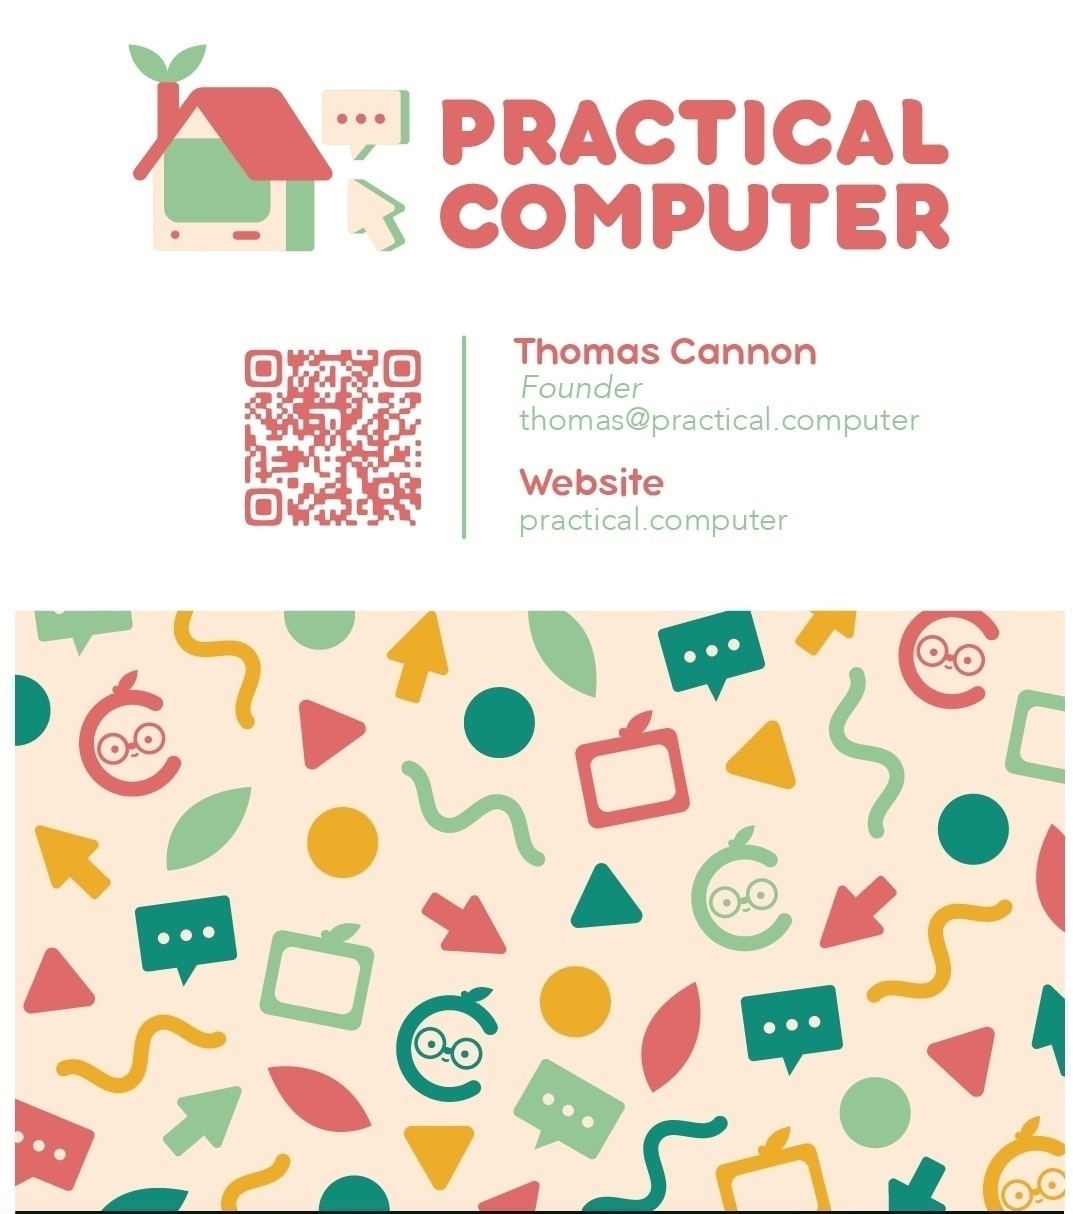 Business card design for Practical Computer; with our logo, my contact info, and a patterned background made of various brand elements.